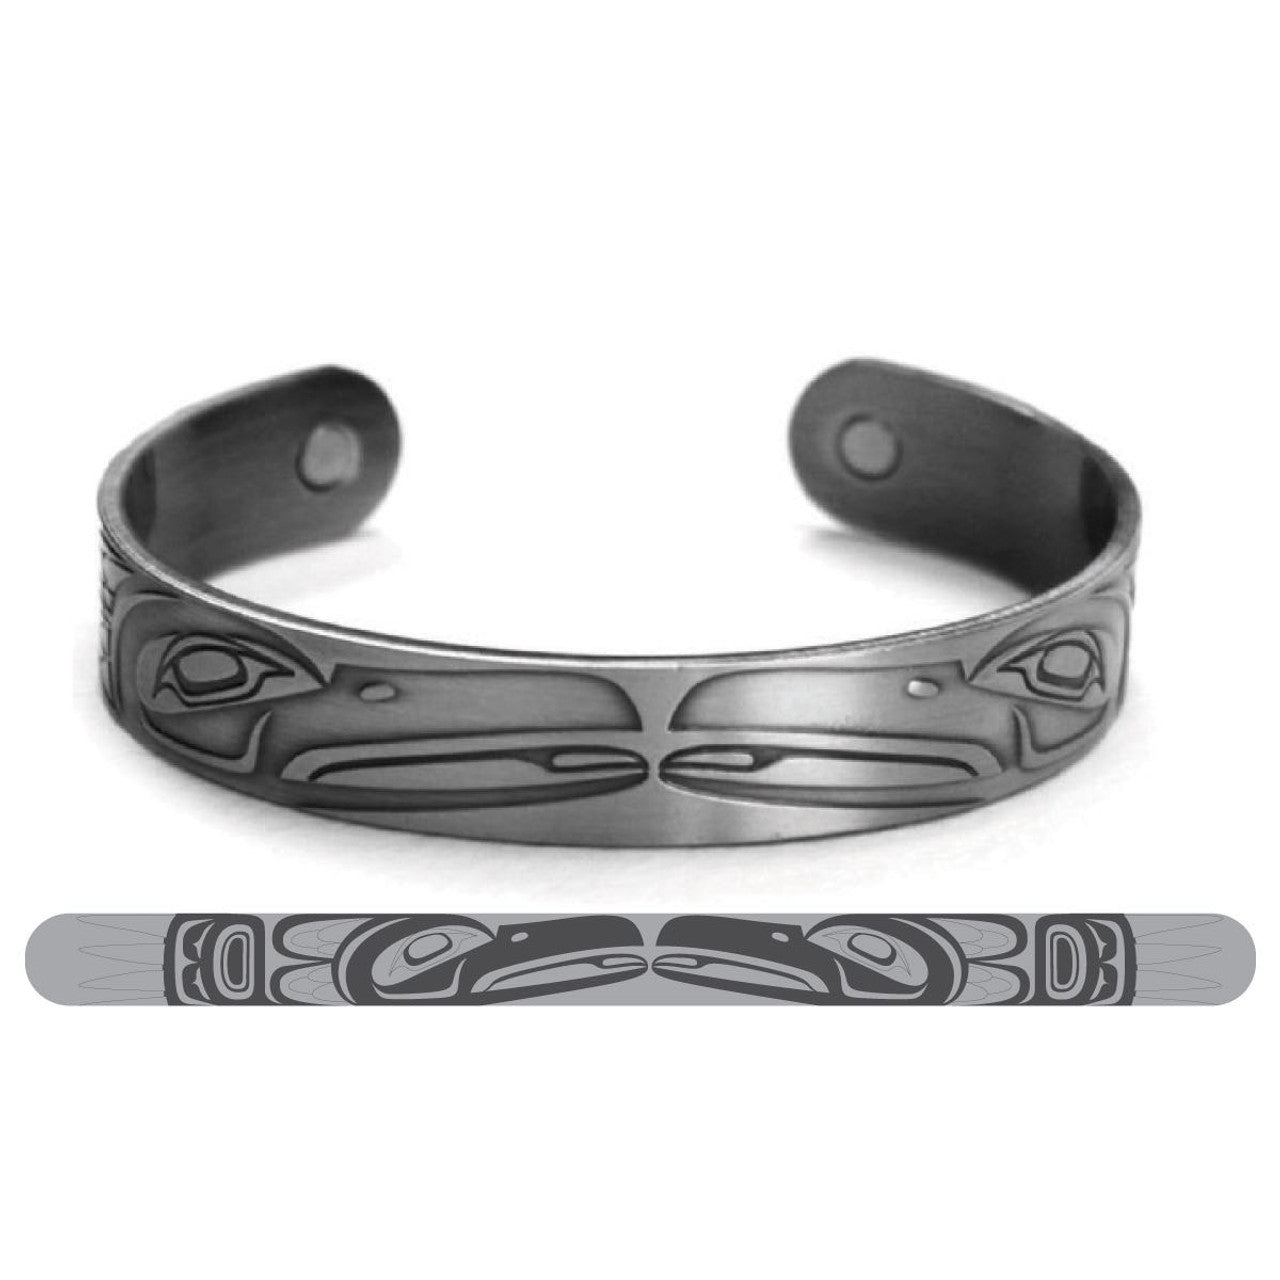 BRUSHED SILVER BRACELETS - Raven - Abr10 - House of Himwitsa Native Art Gallery and Gifts